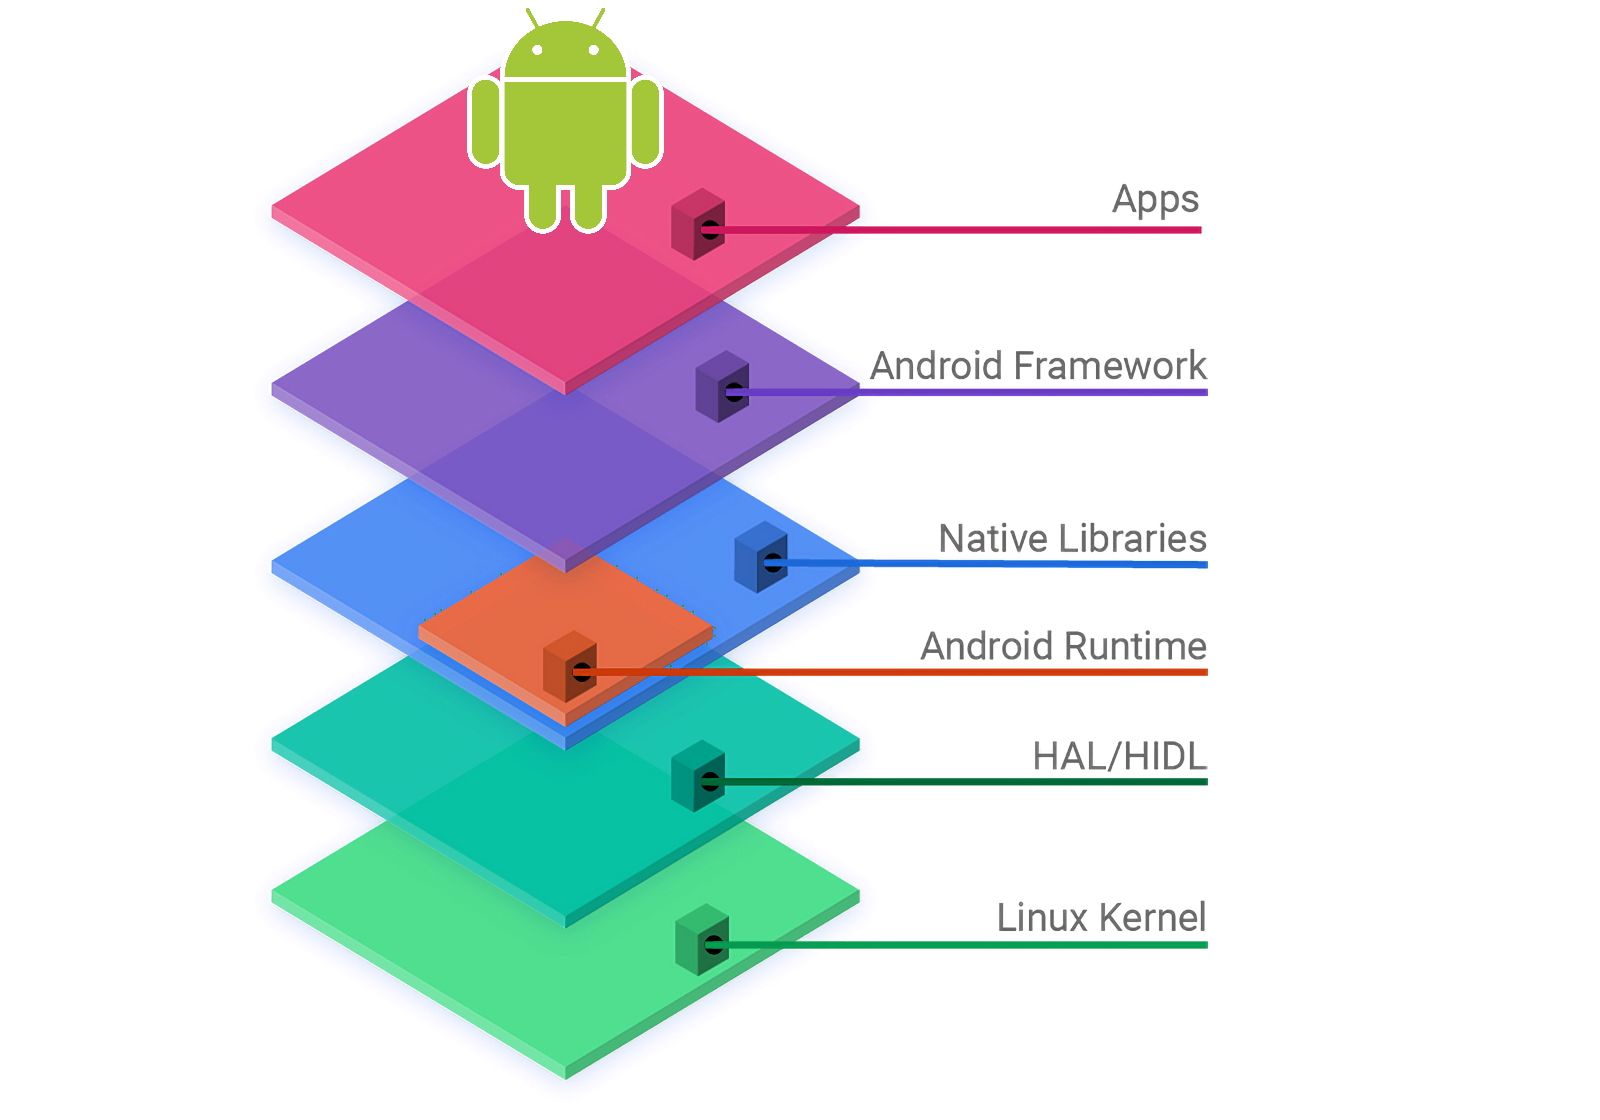 The layers of the Android open source project